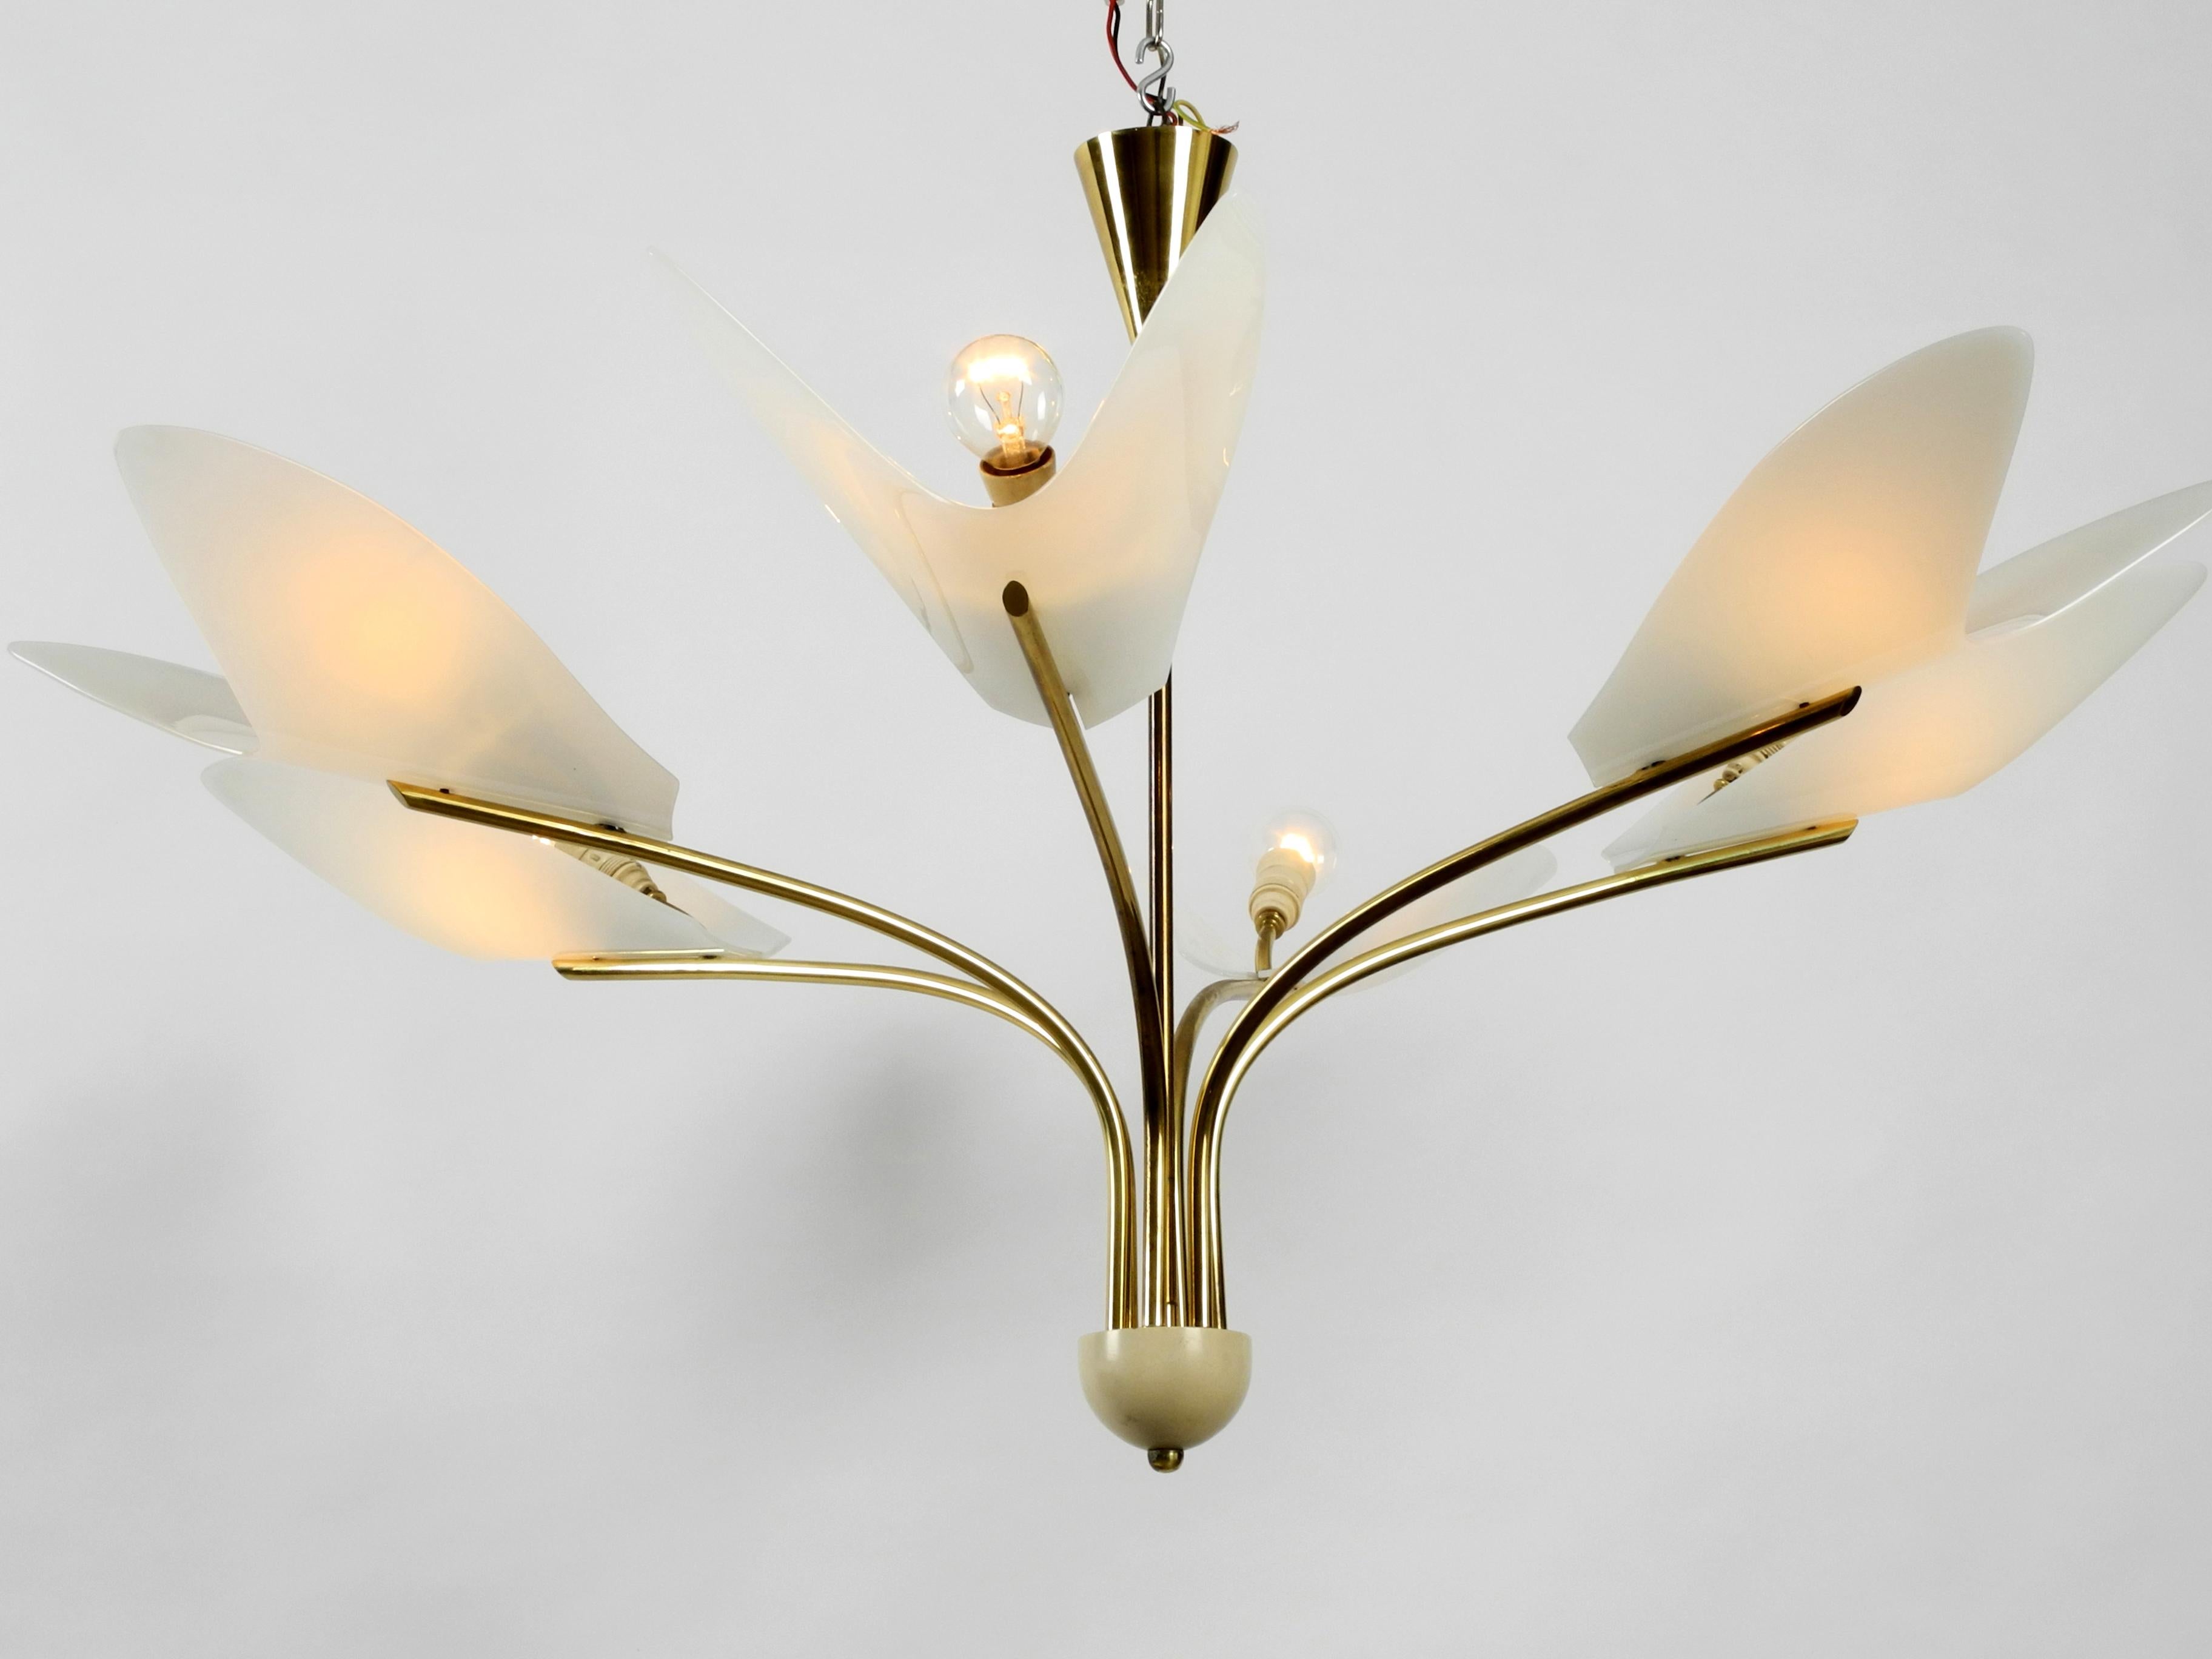 Gorgeous giant Mid-Century Modern brass chandelier with six arms made of brass and big Plexiglas shades.
Extraordinary rare design with wing-like white lampshades.
Six original metal E14 sockets for max. 40W each.
In very good condition. Suitable